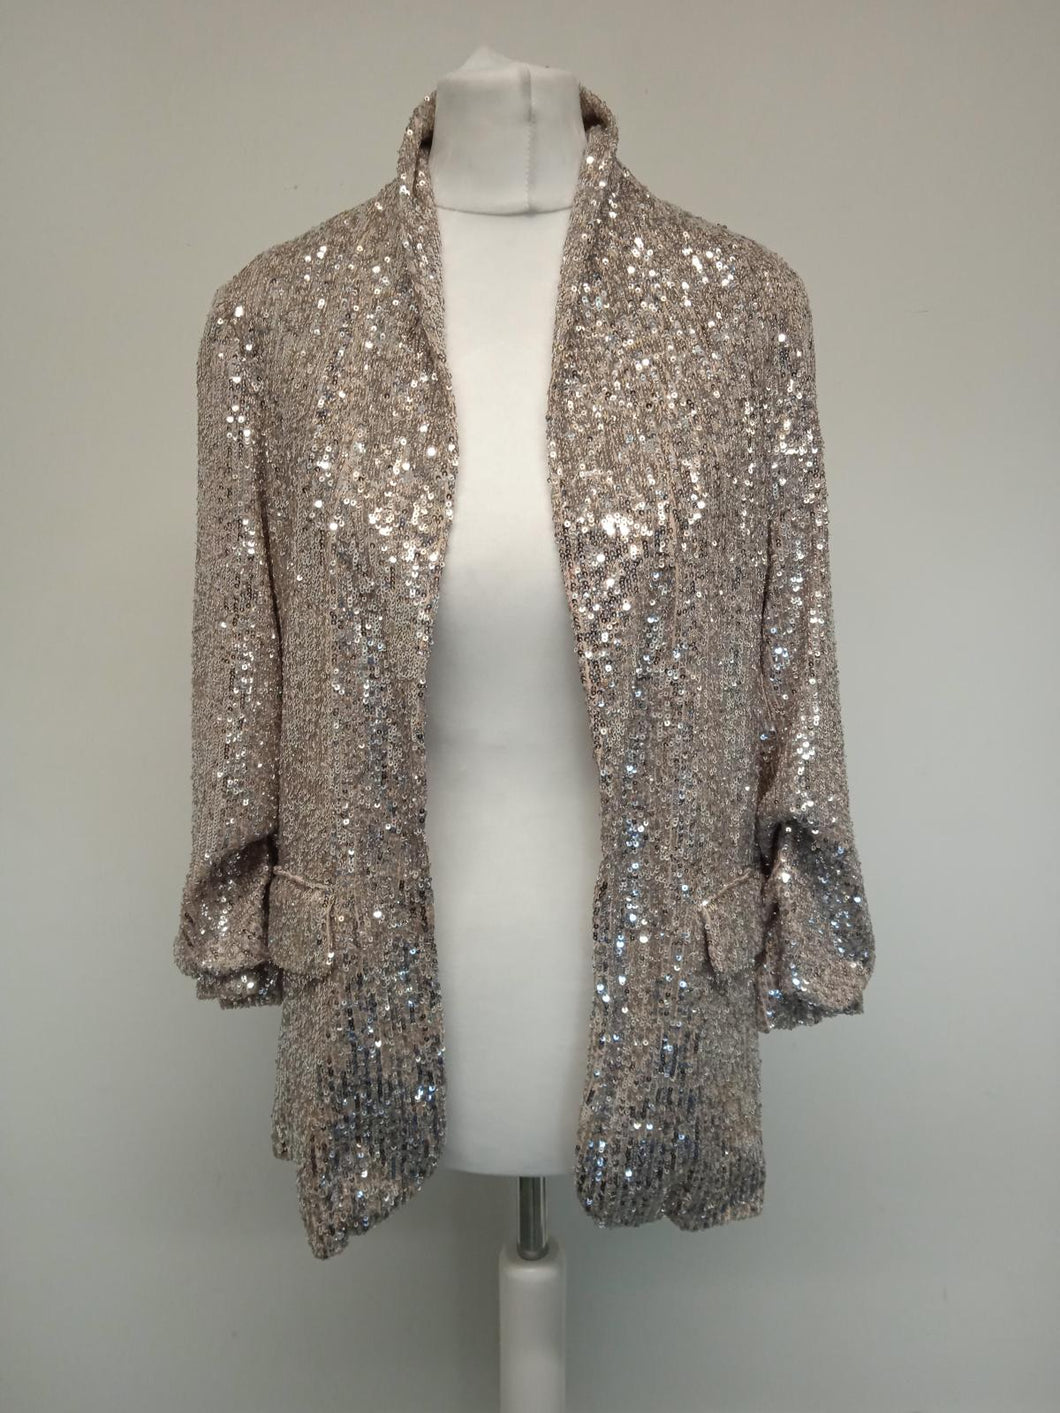 M&S Ladies Silver Relaxed Sequin 3/4 Sleeve Open Front Blazer Jacket UK8 NEW